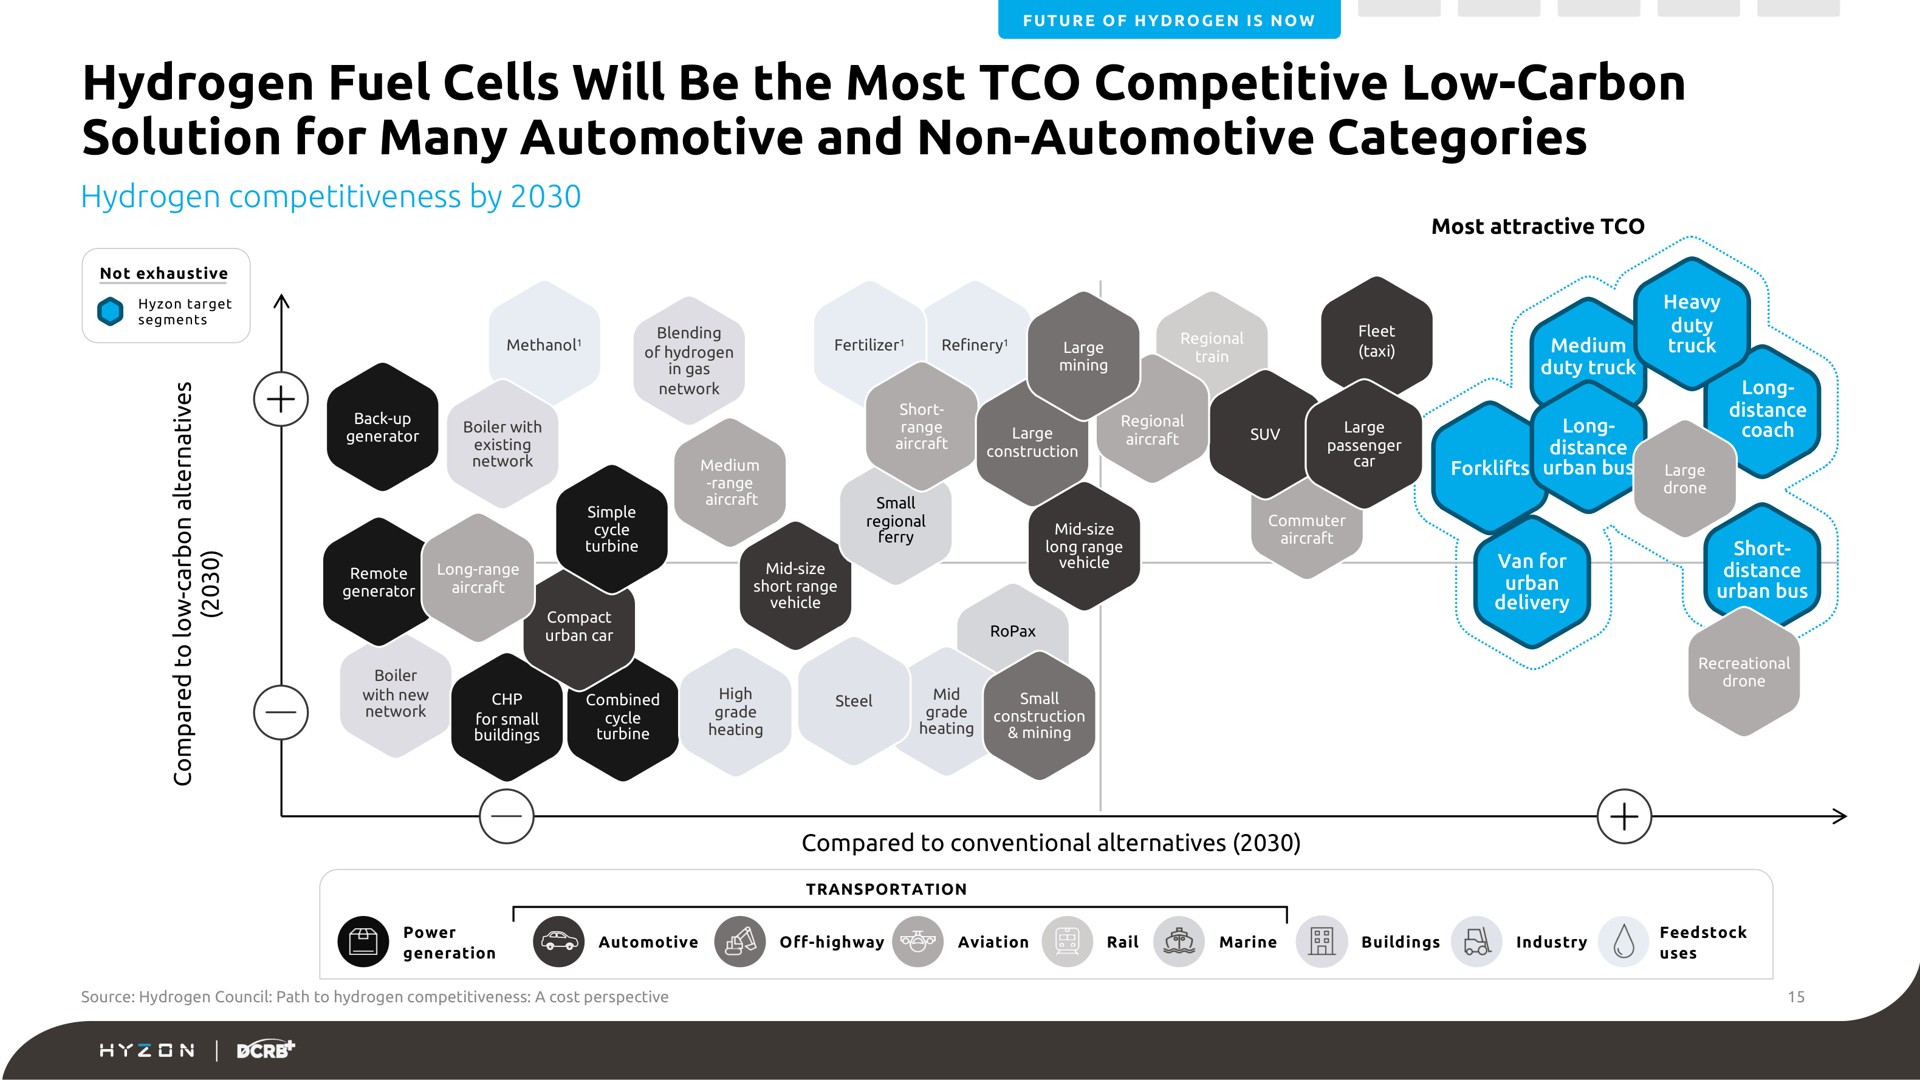 hydrogen fuel cells will be the most competitive low carbon solution for many automotive and non automotive categories | Hyzon